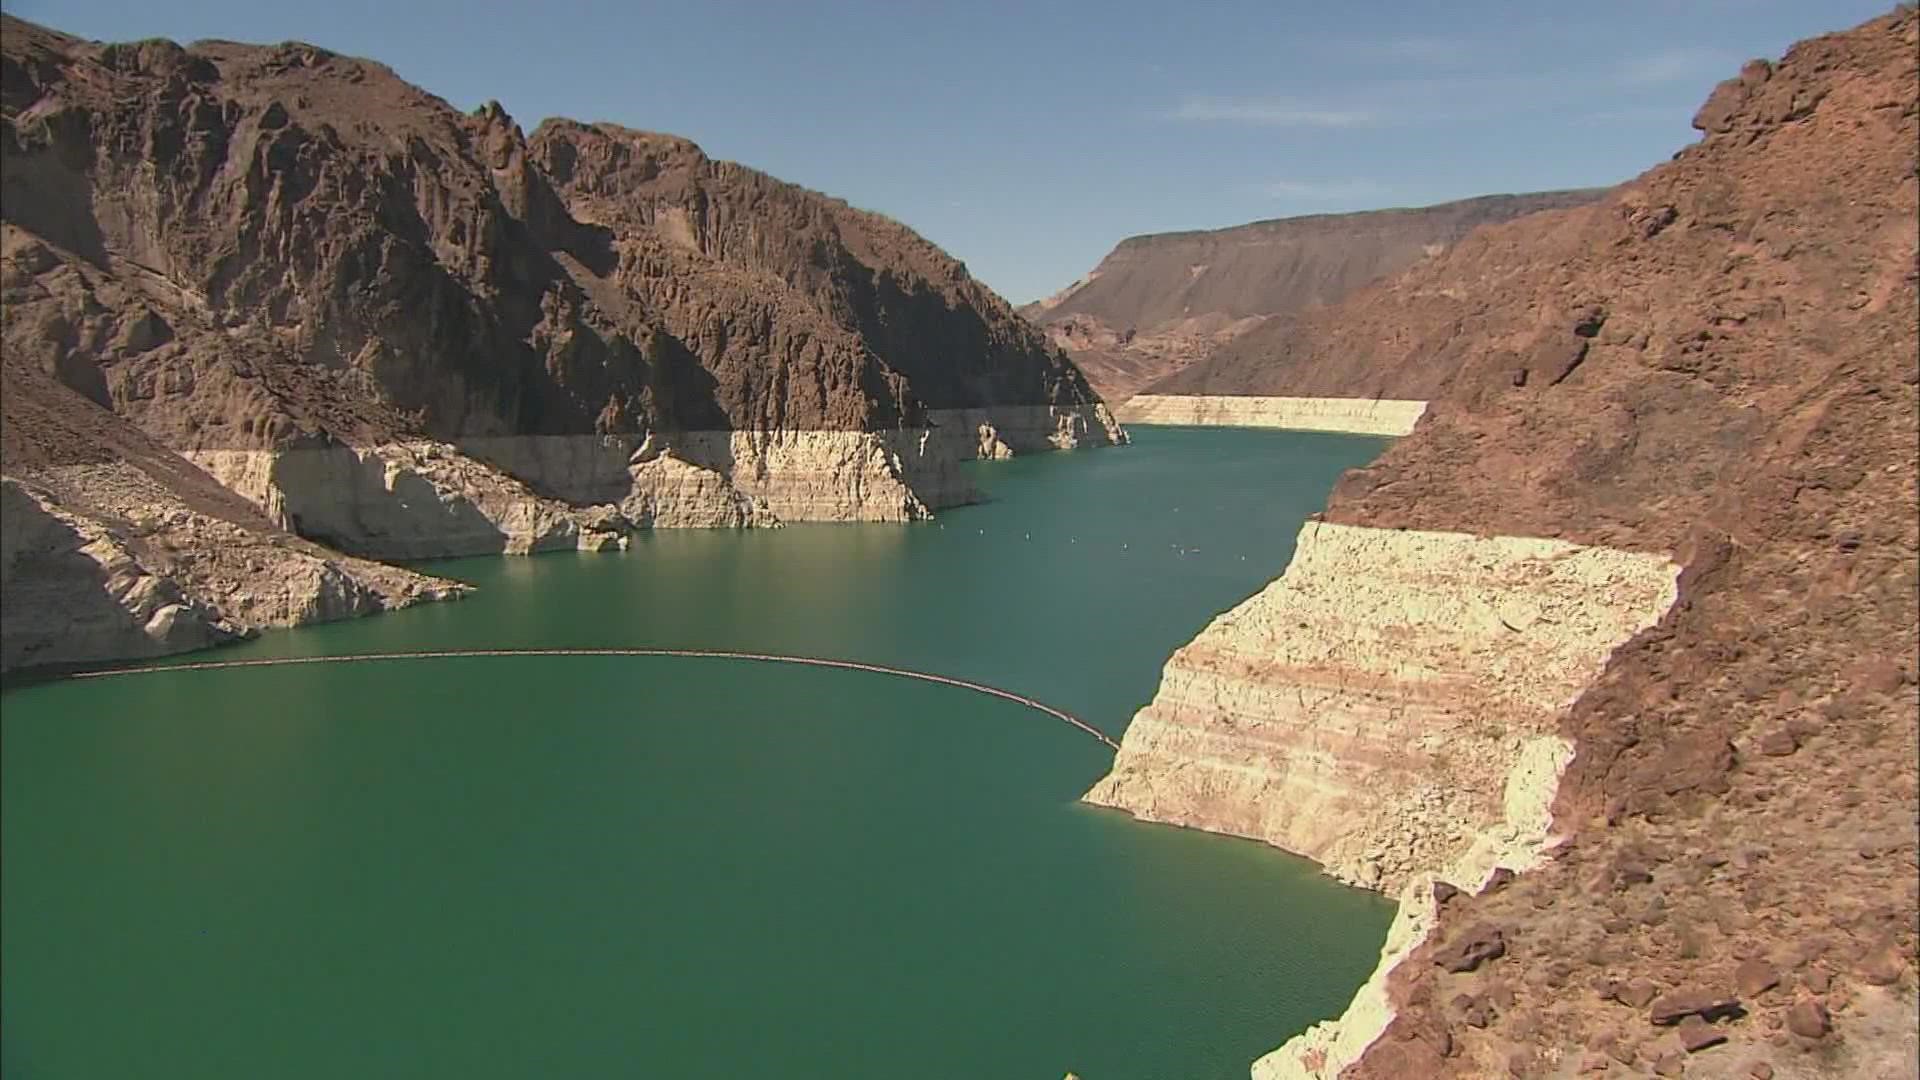 The 7 states that share the river are trying to figure out how to conserve 2-4 million acre-feet of water to protect critical elevations at Lake Powell & Lake Mead.